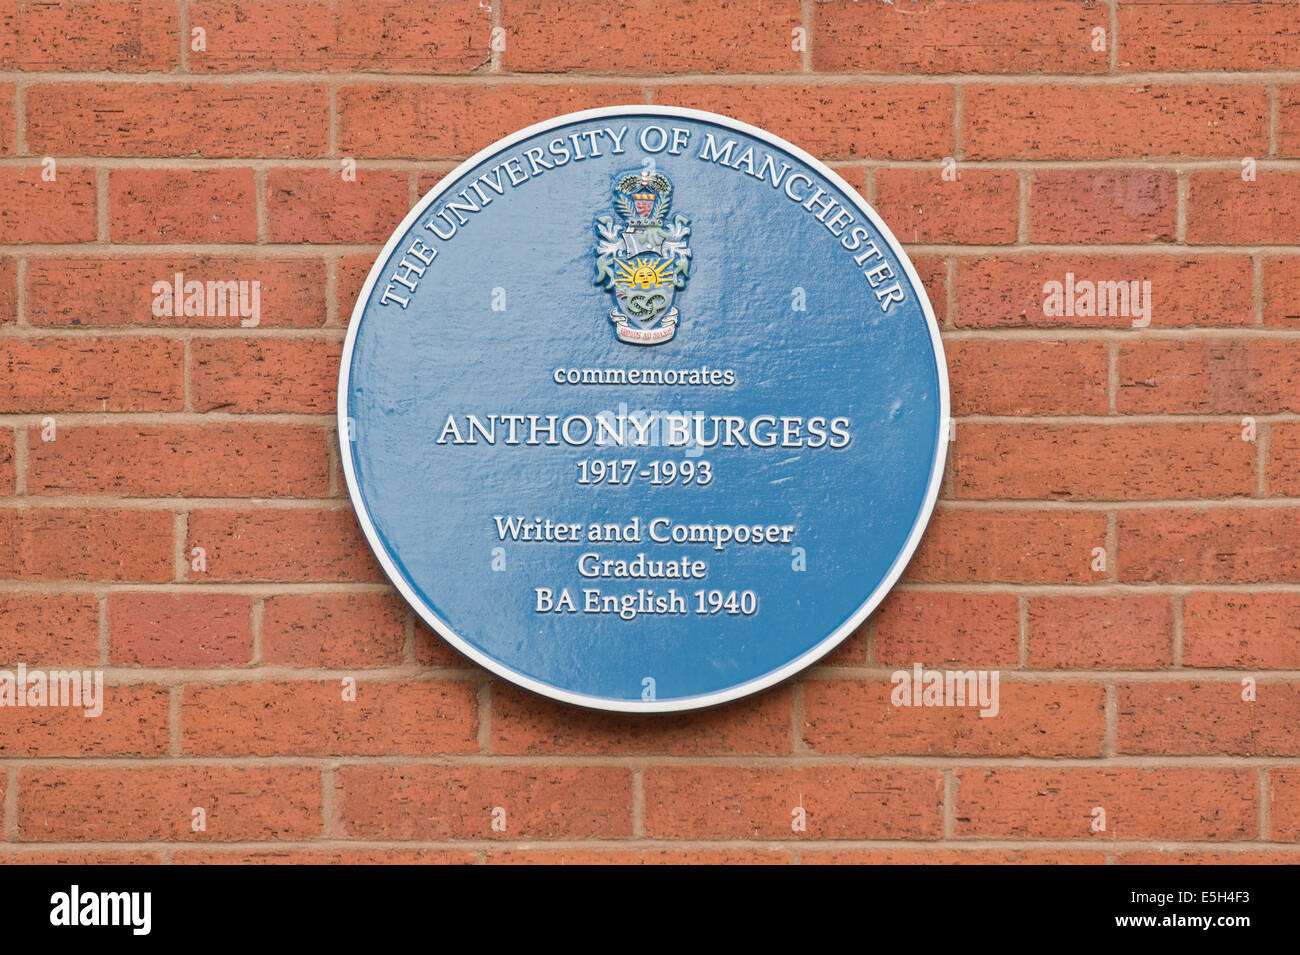 A plaque to commemorate writer Anthony Burgess located in the University campus area (off Oxford Road) in Manchester. Stock Photo